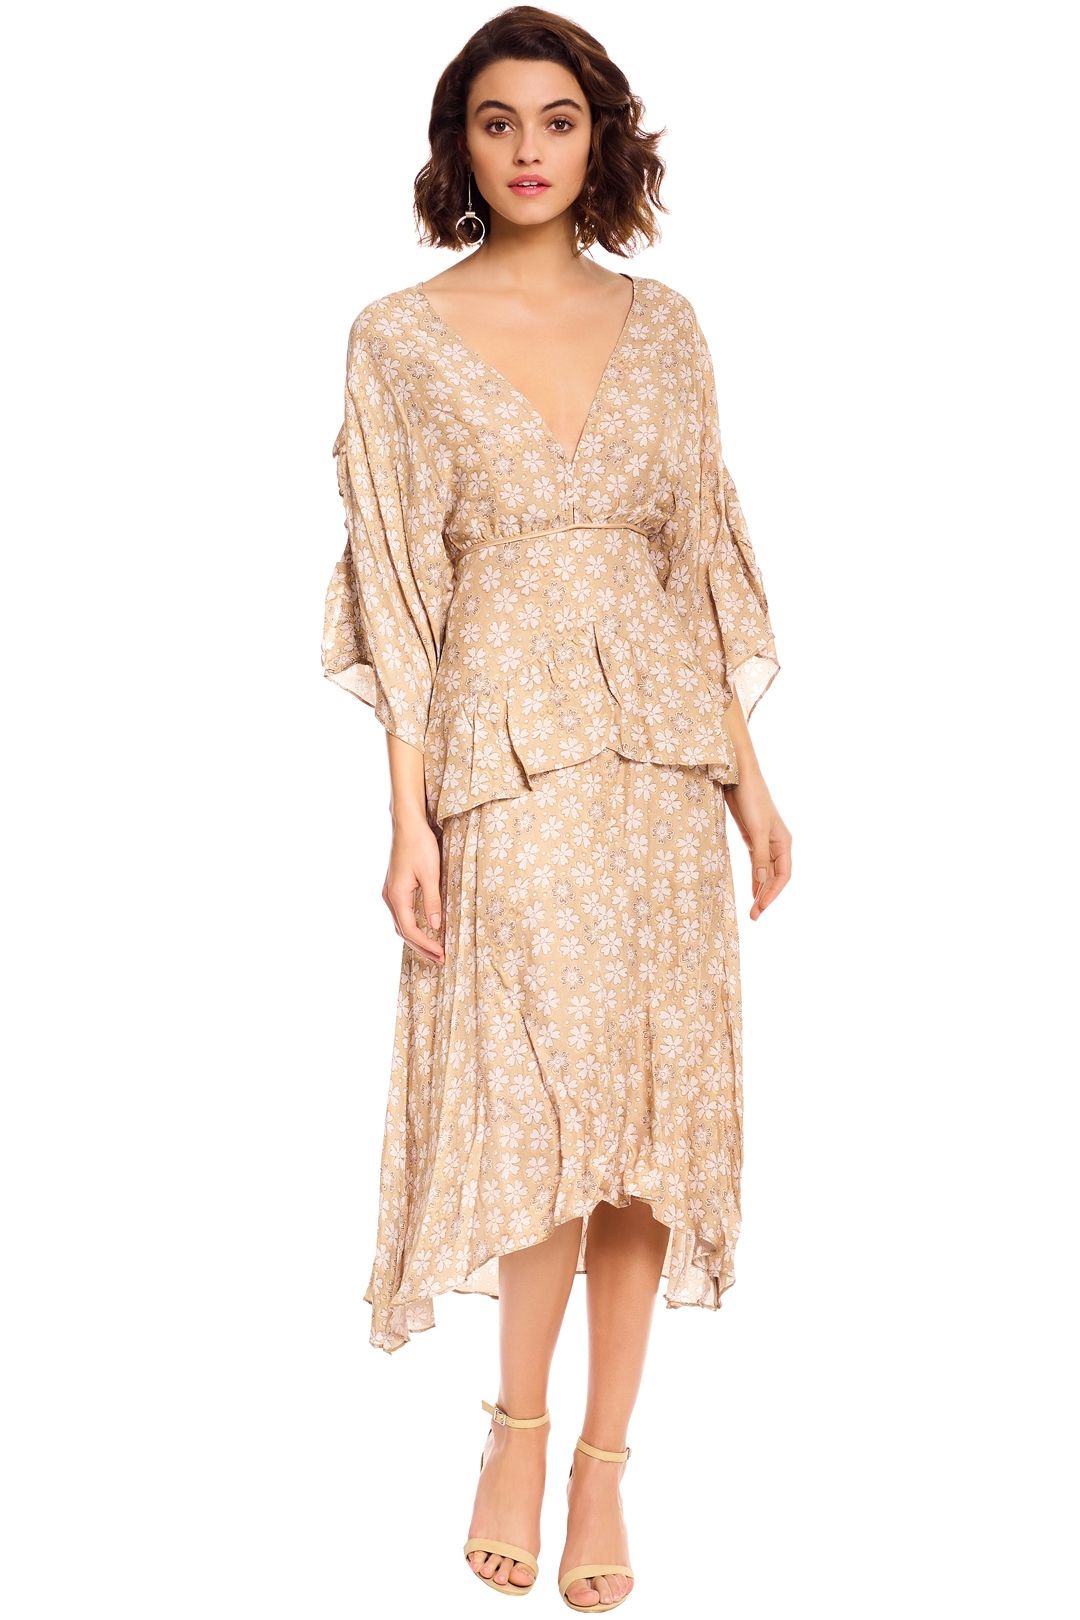 Talulah - Charismatic Woman Midi Dress - Nude Floral - Front